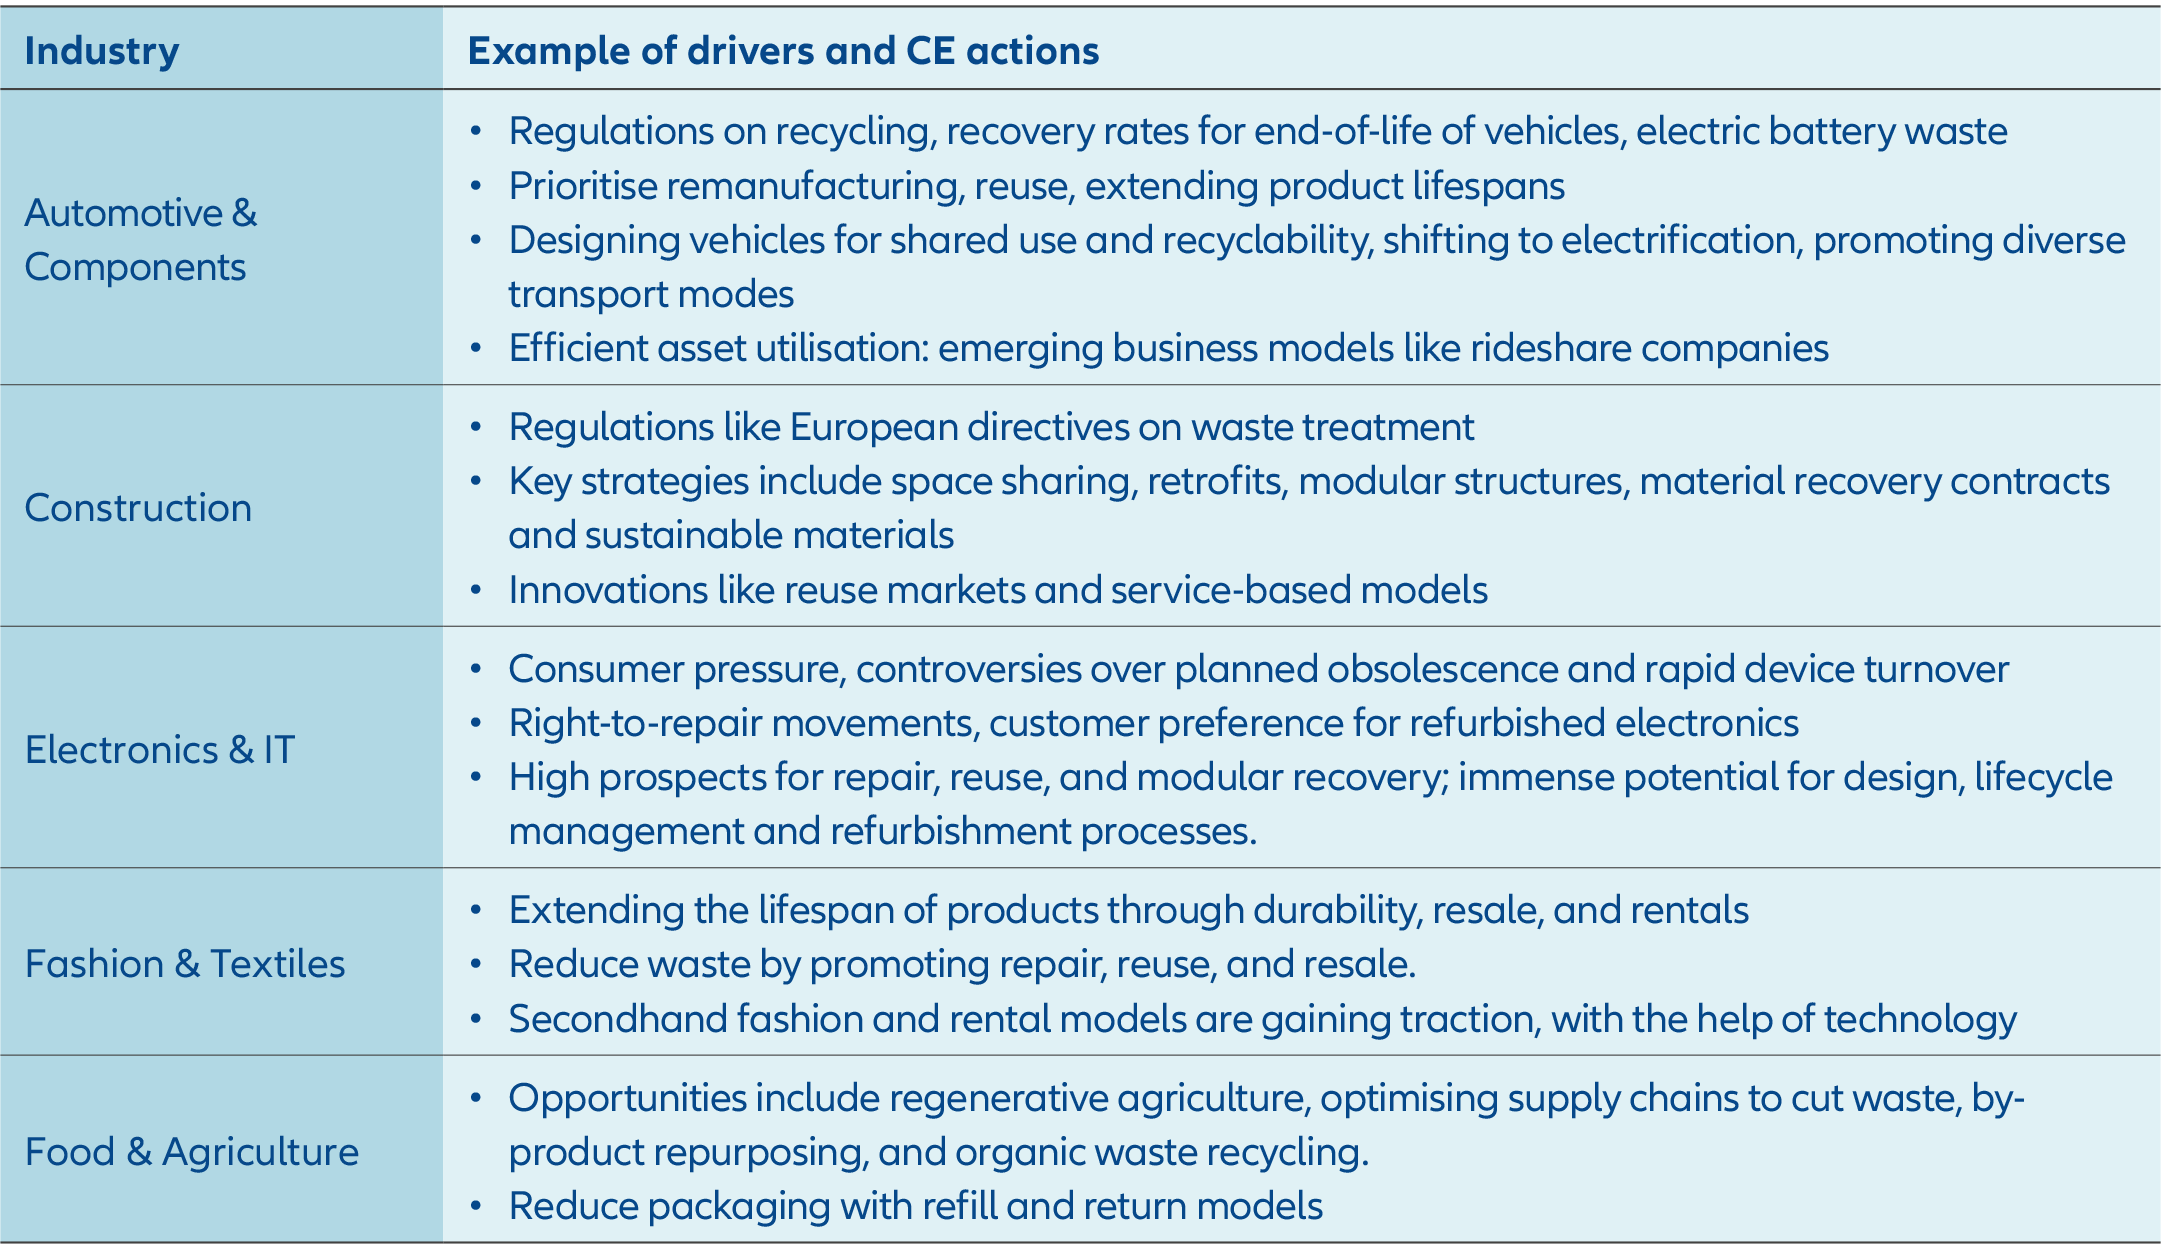 Exhibit 3: Industry summary of drivers and CE actions